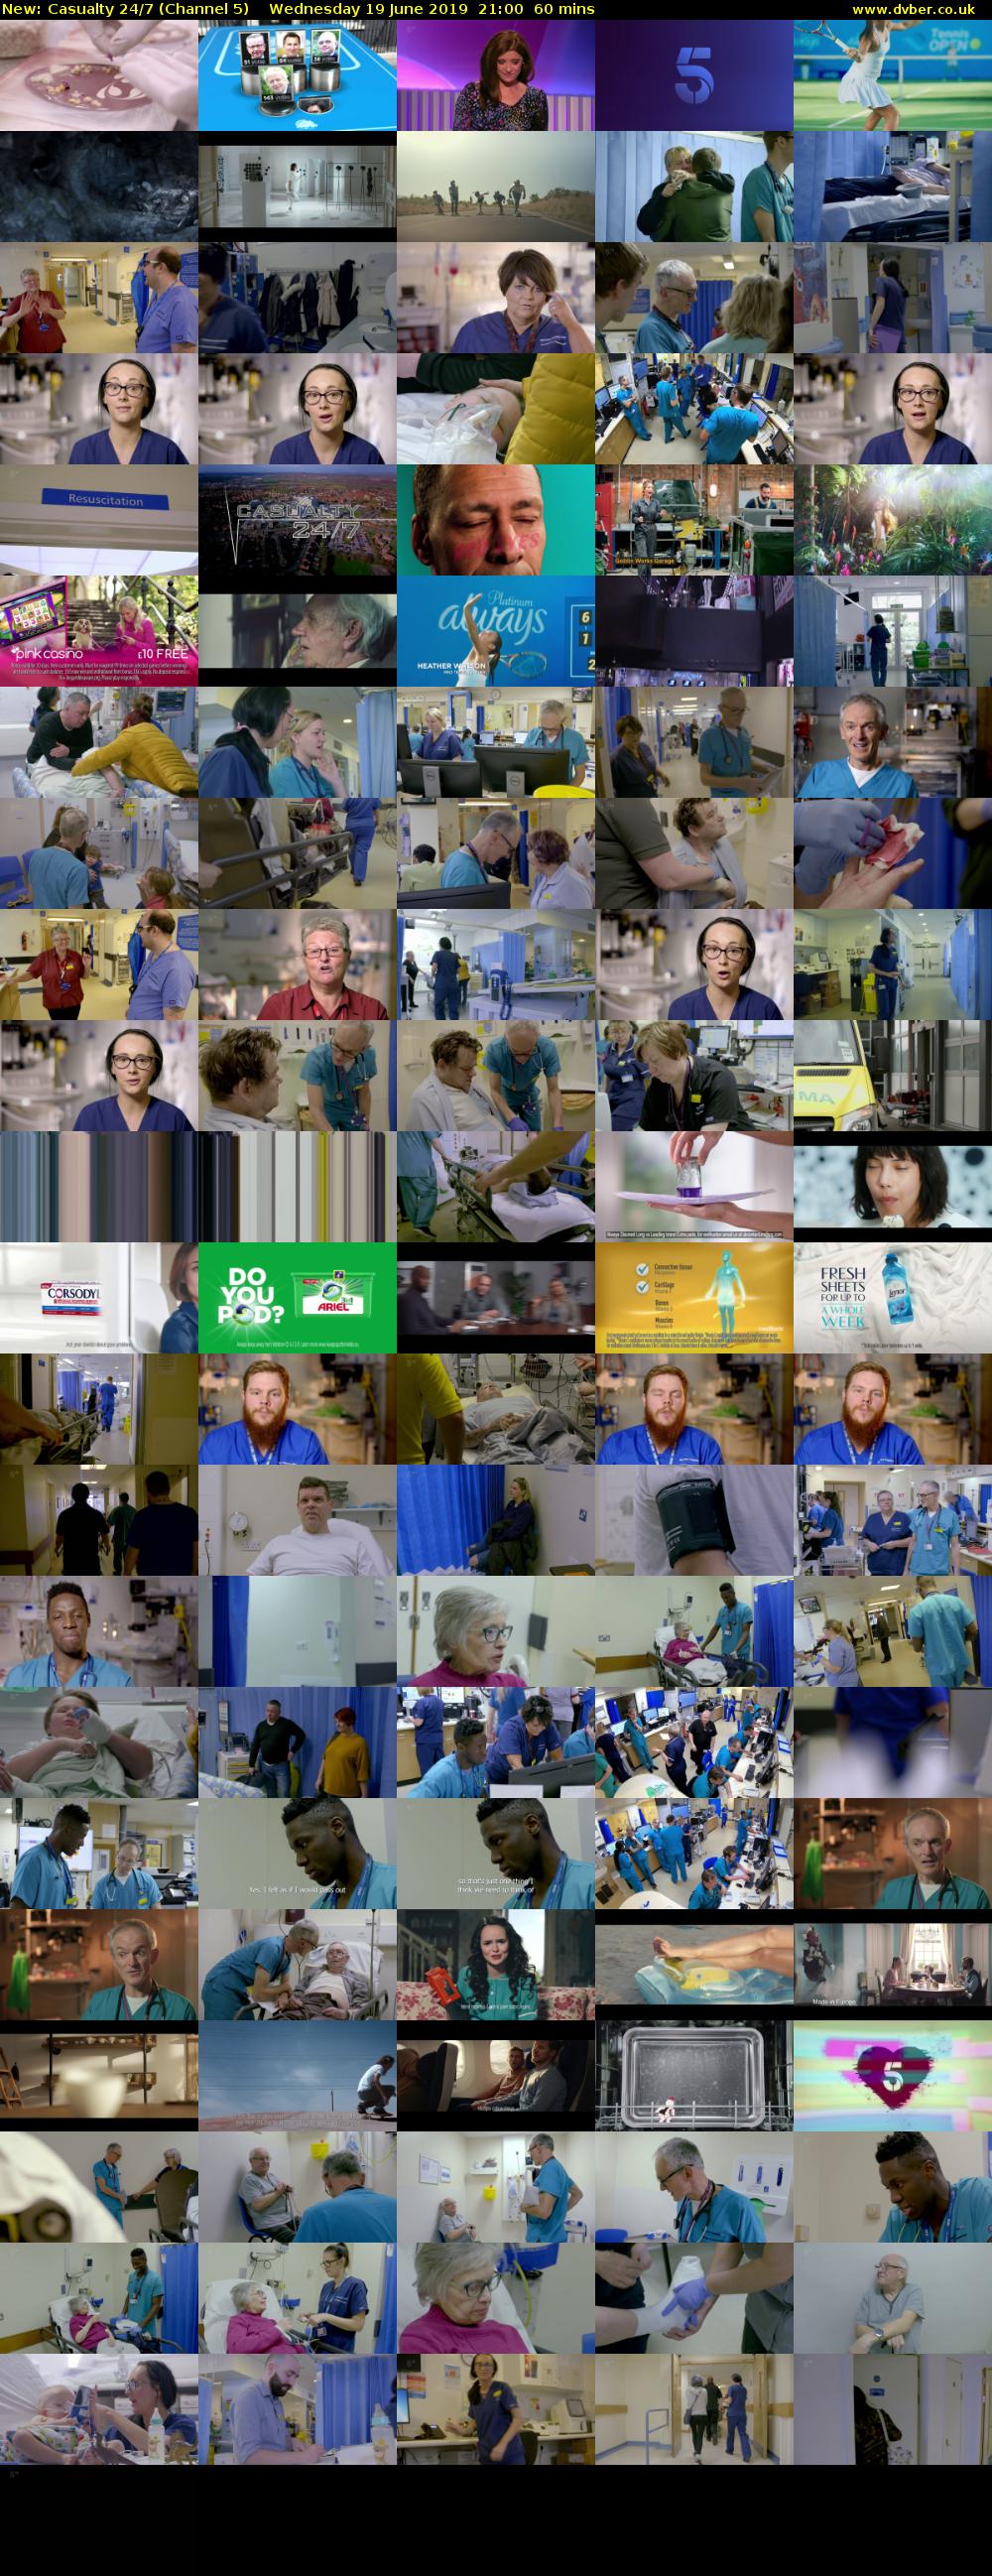 Casualty 24/7 (Channel 5) Wednesday 19 June 2019 21:00 - 22:00